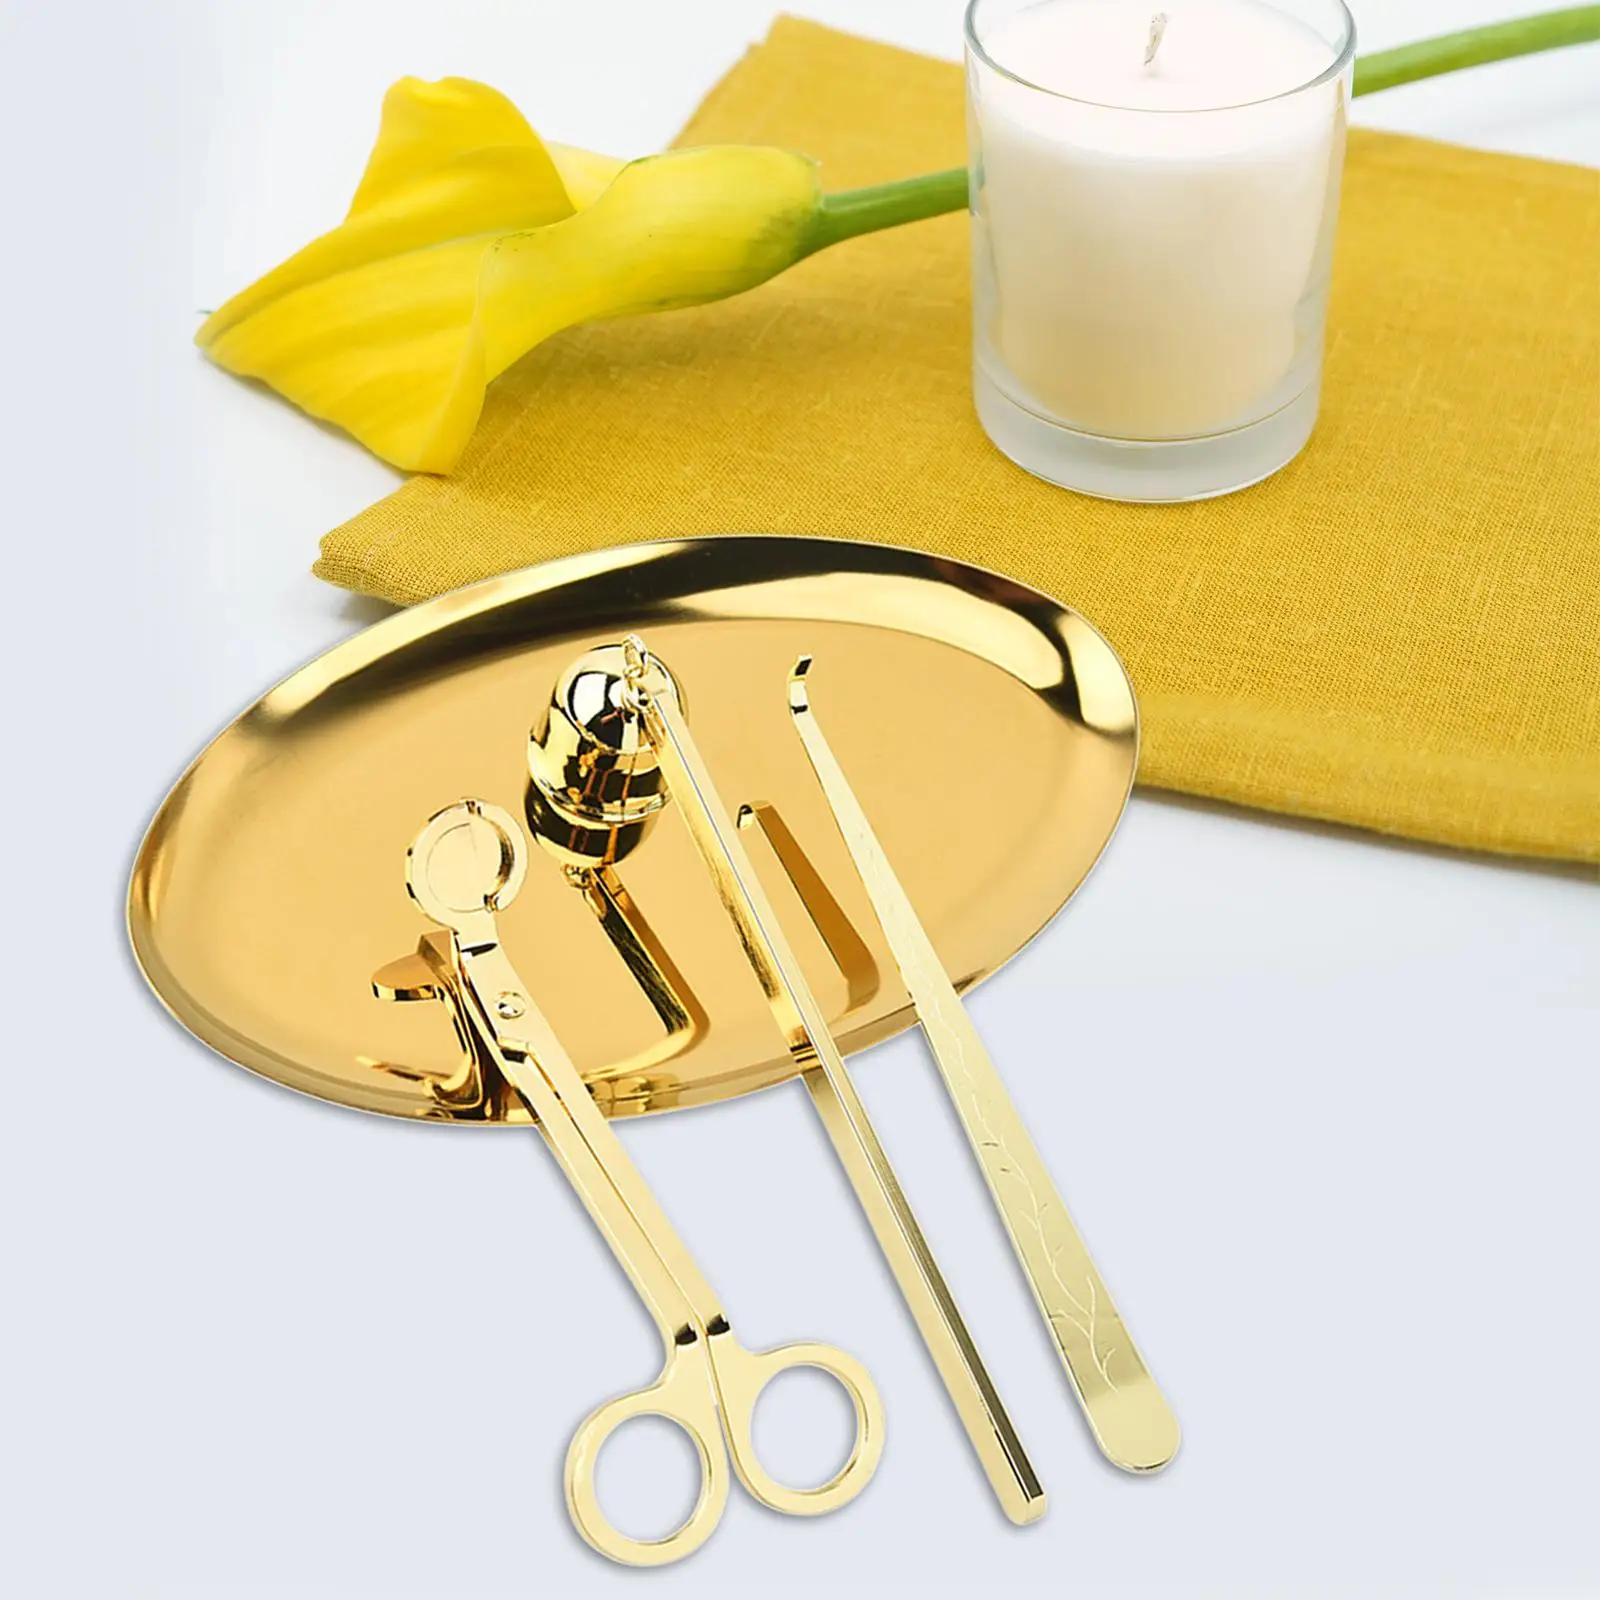 4Pcs Candle Accessories Wick Dipper Cutter Kit Candle Extinguisher with Tray for Women Sturdy Multifunctional Scratch Resistant